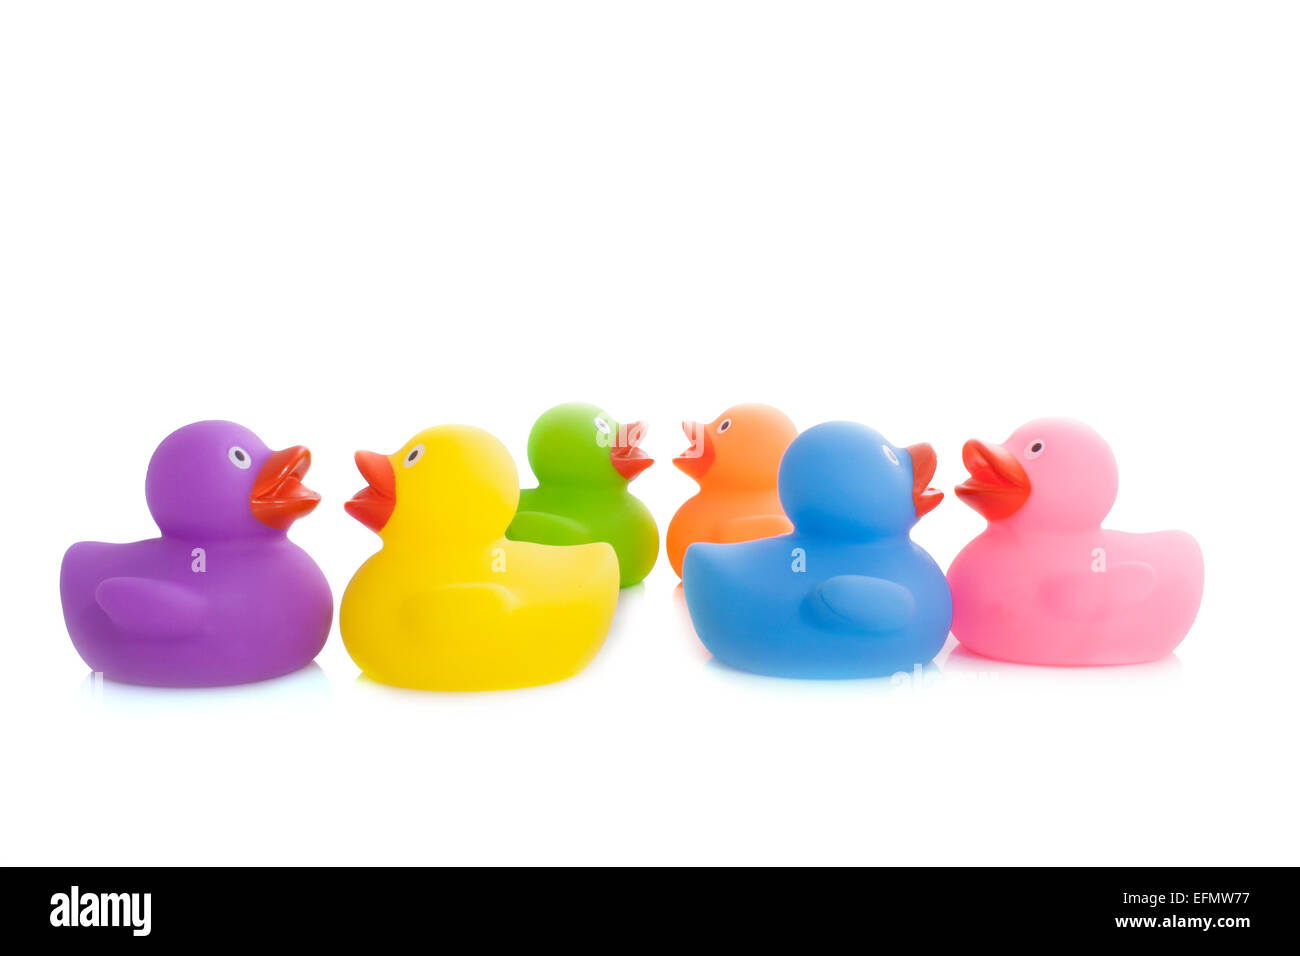 Six colorful rubber ducks isolated on white Stock Photo